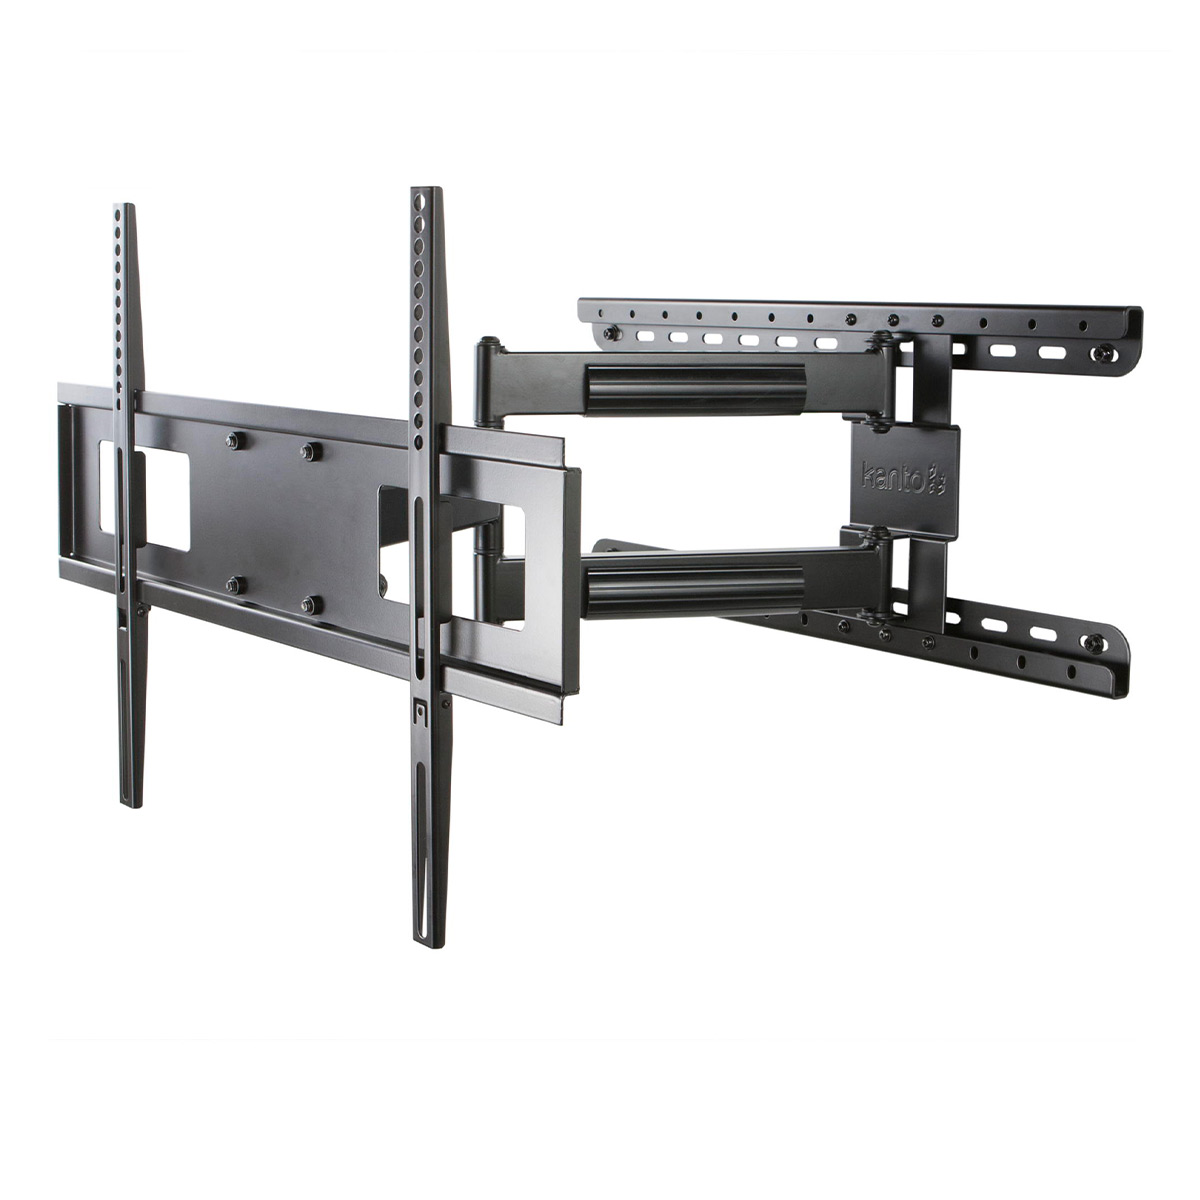 Kanto FMC4 Full Motion Mount with Adjustable Pivot Point for 30" to 60" TVs - image 1 of 12